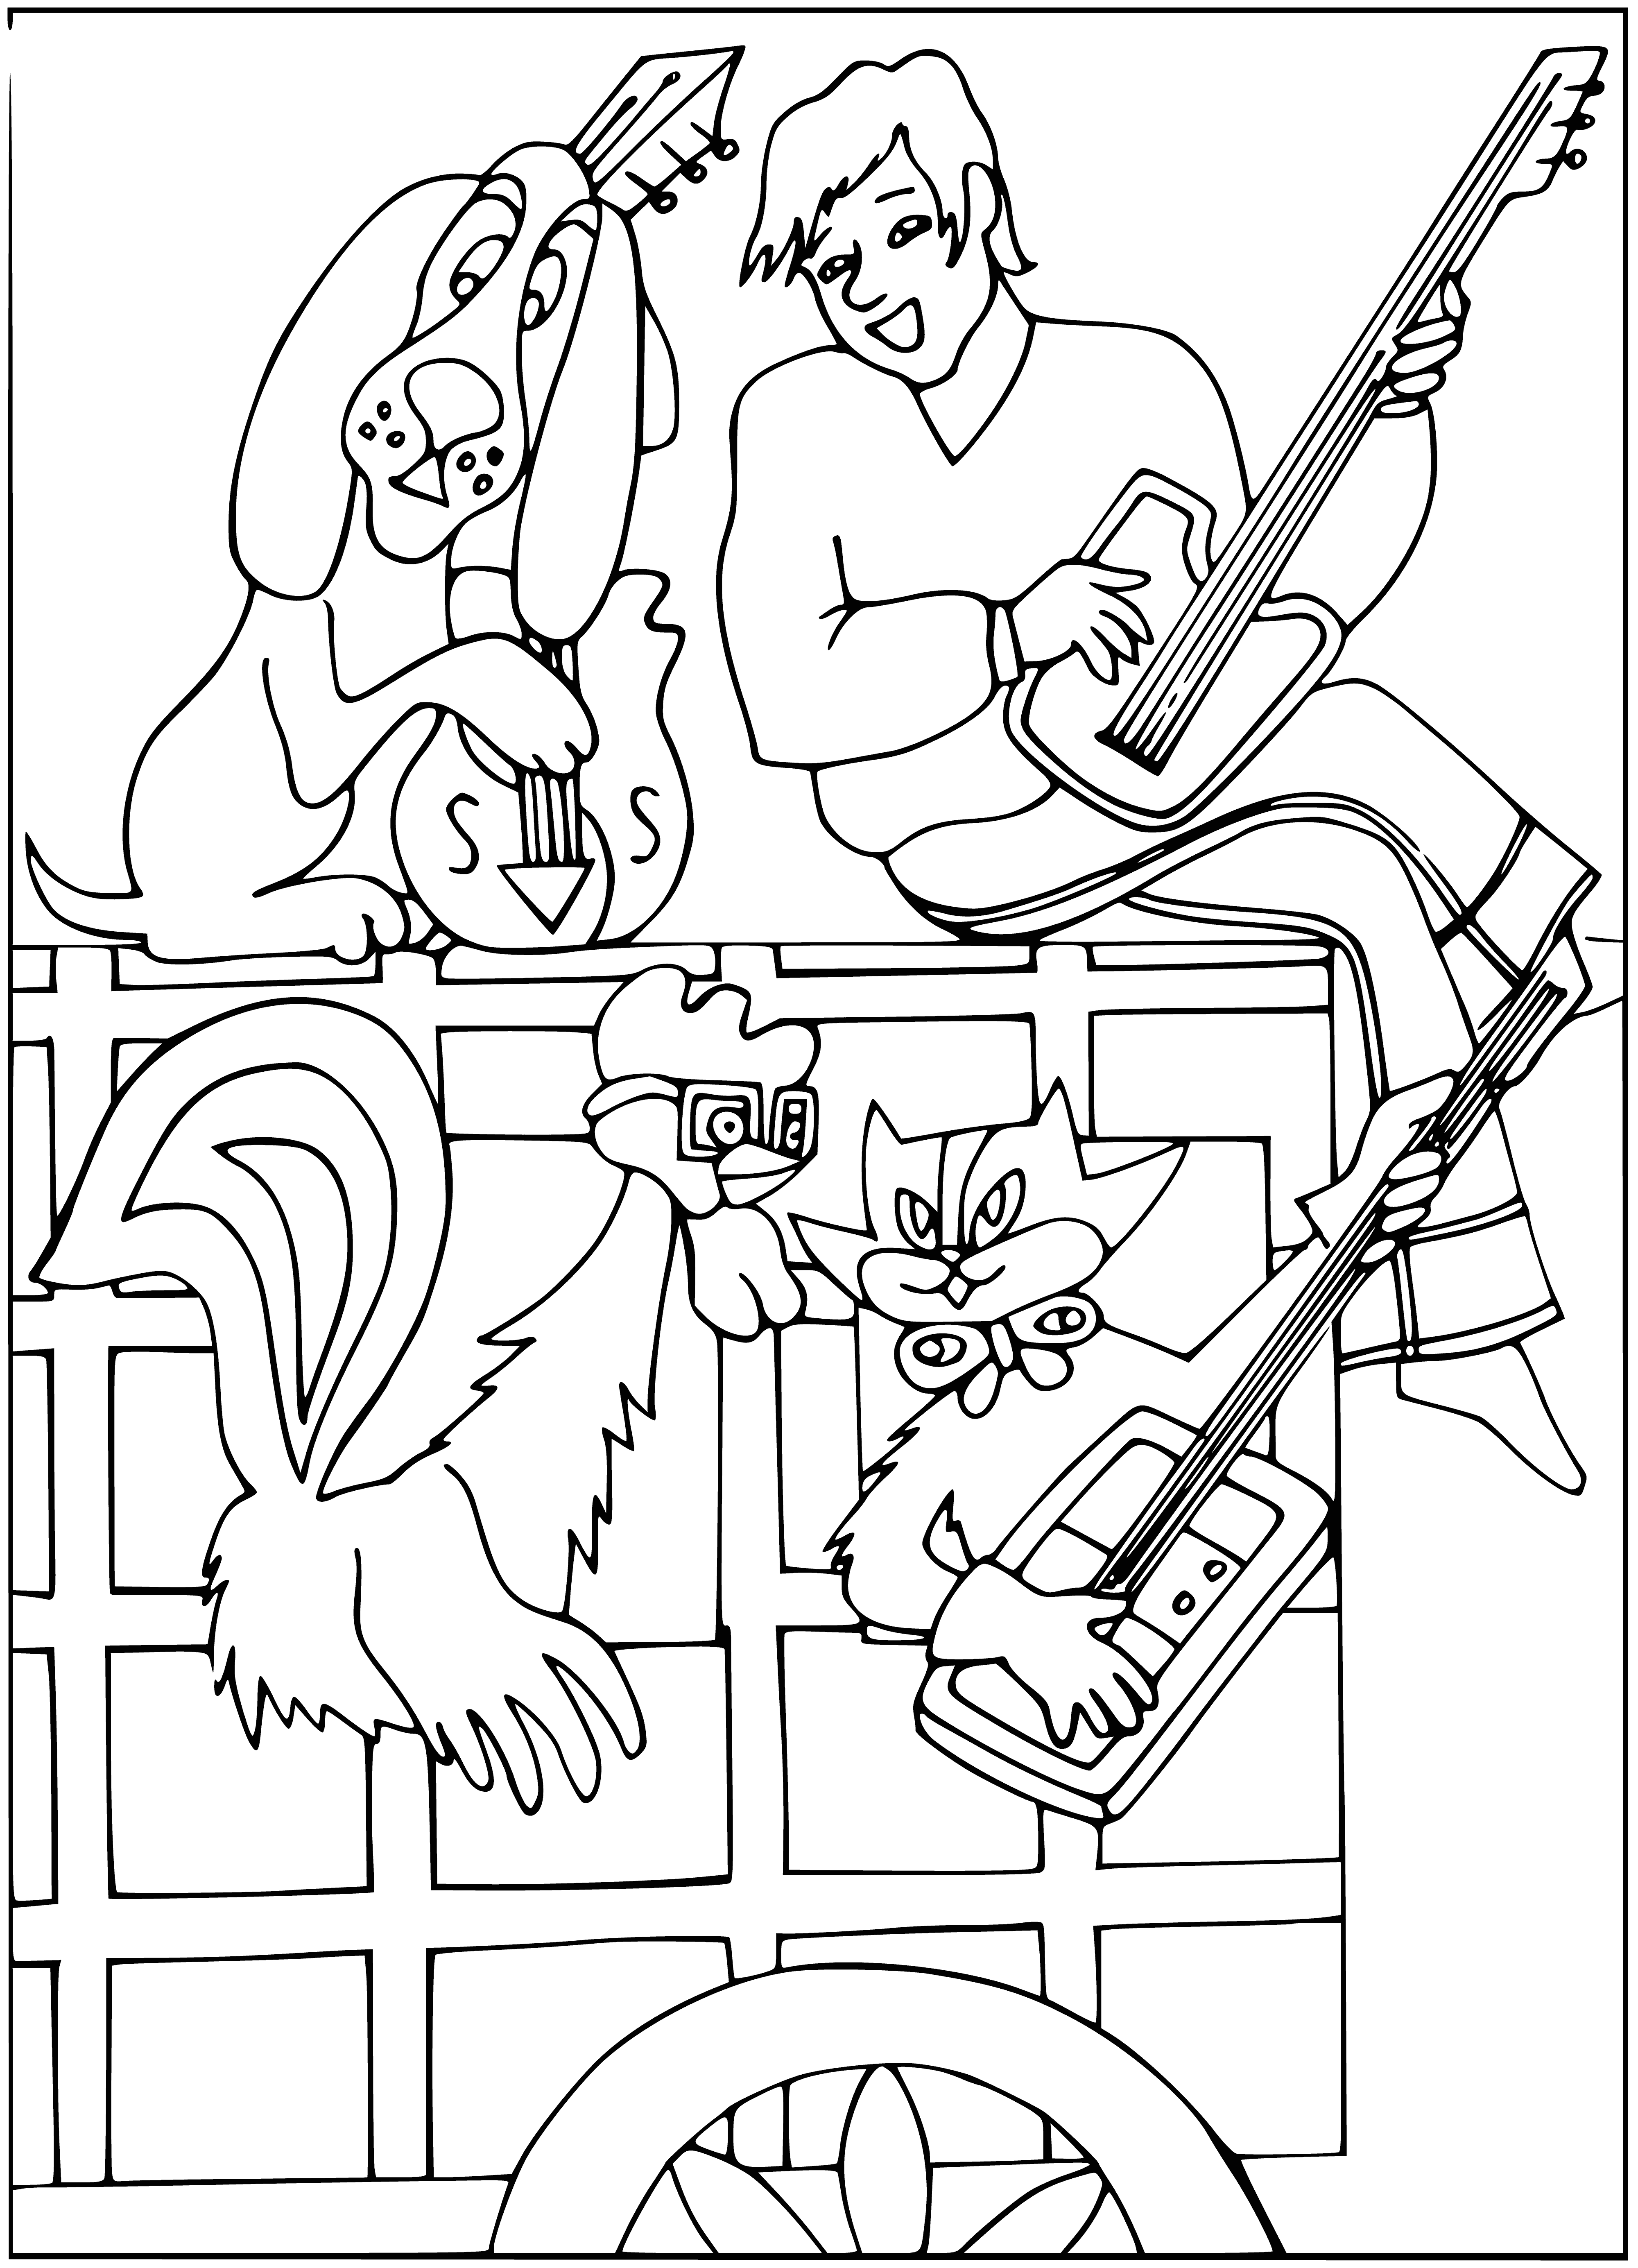 coloring page: 5 animals stand on hind legs looking left, waiting for something. Donkey, dog, cat, rooster, & rat.